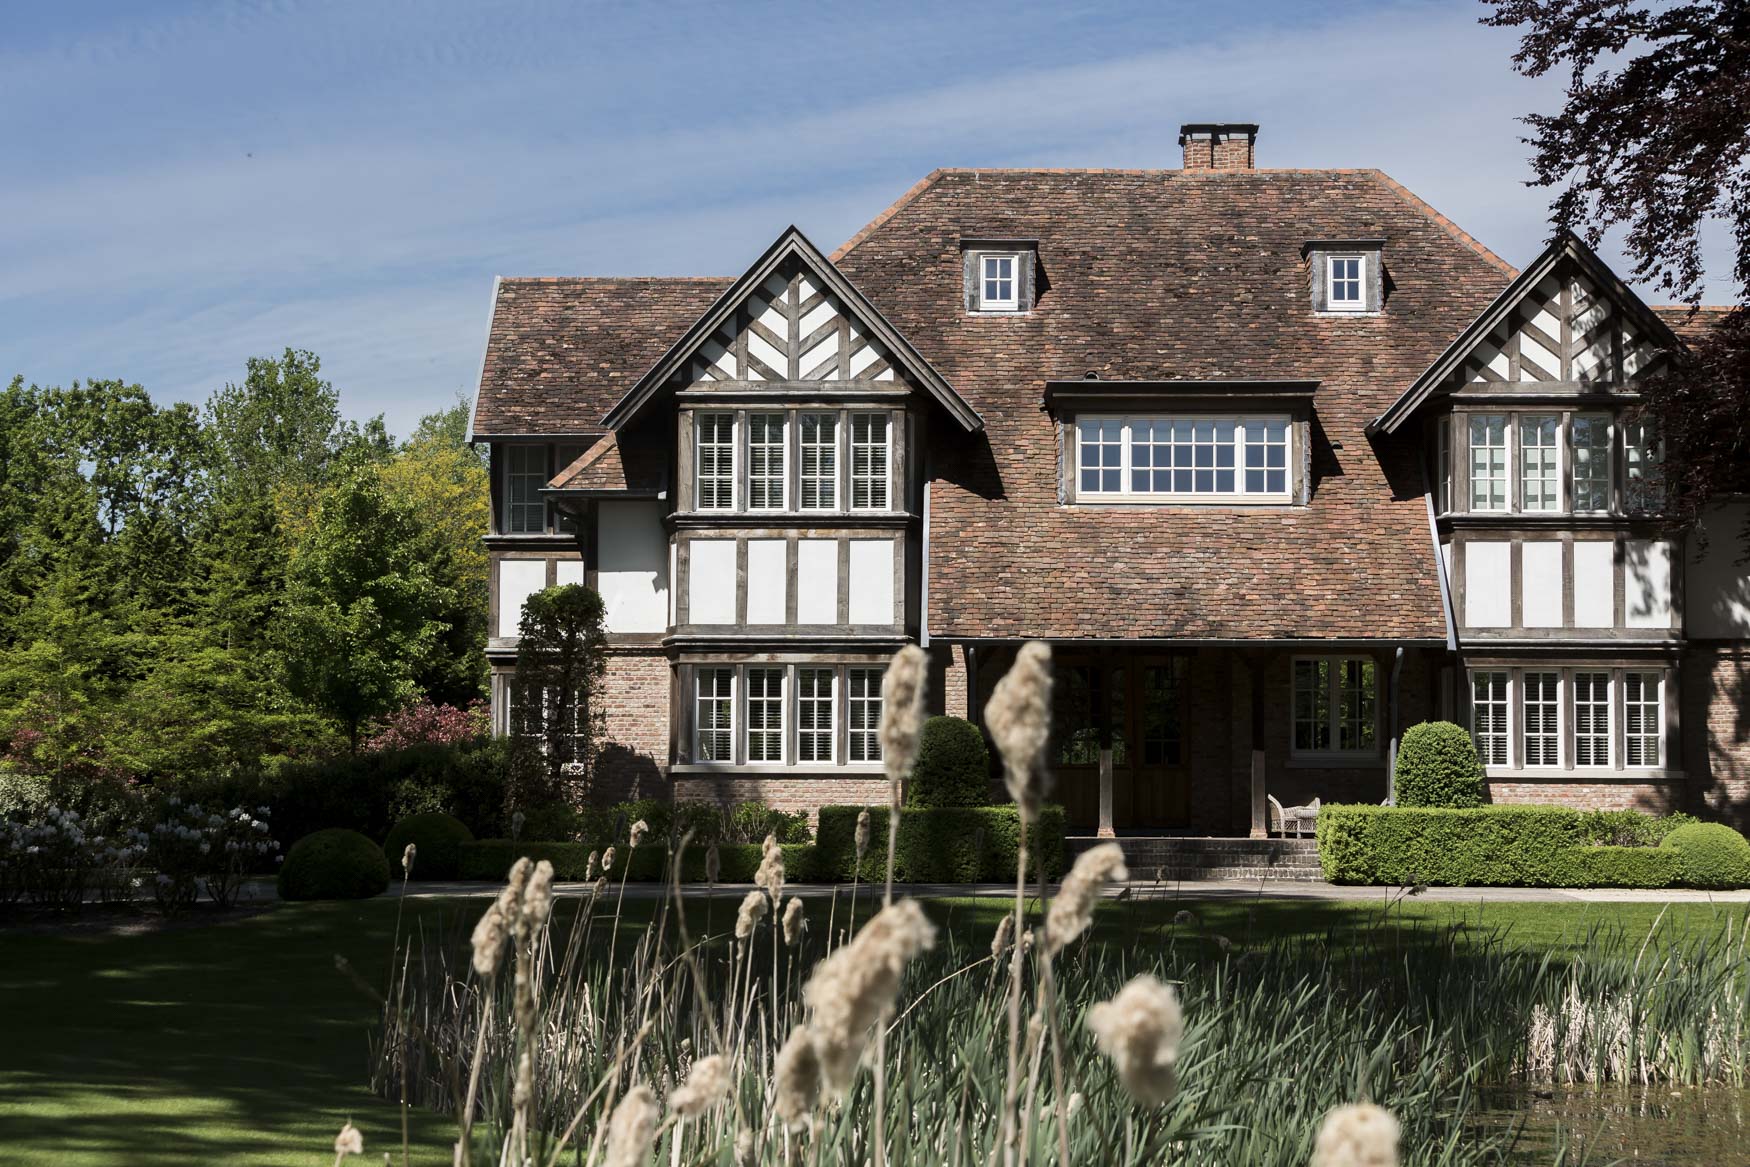 A Tudor-style house with wooden beams and brick walls stands amidst lush greenery. Tall grasses sway in the foreground, adding depth to the serene setting.